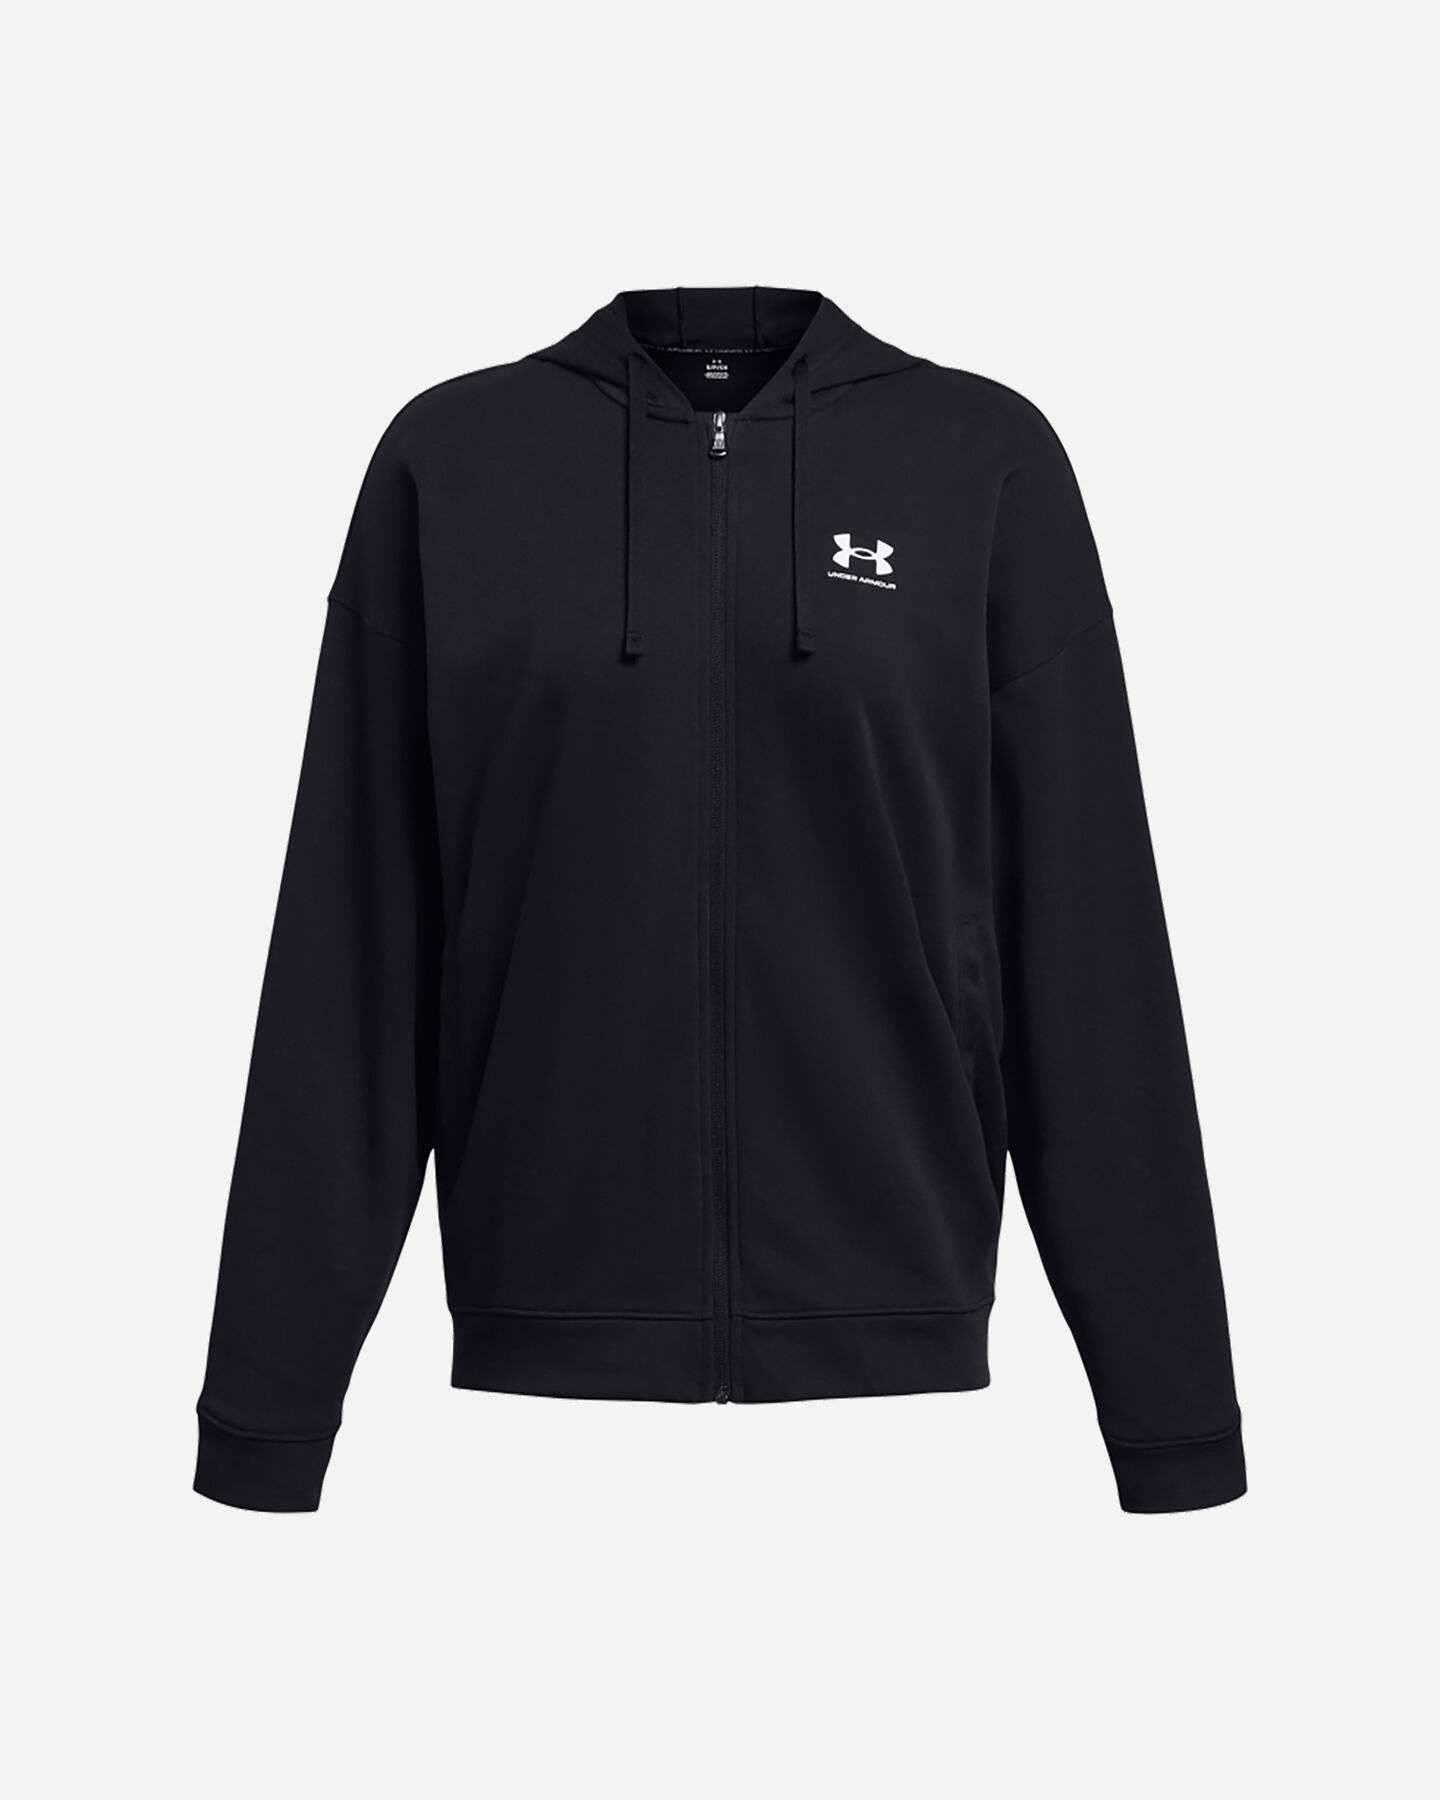  Felpa UNDER ARMOUR RIVAL TERRY W S5642203|0001|XS scatto 0